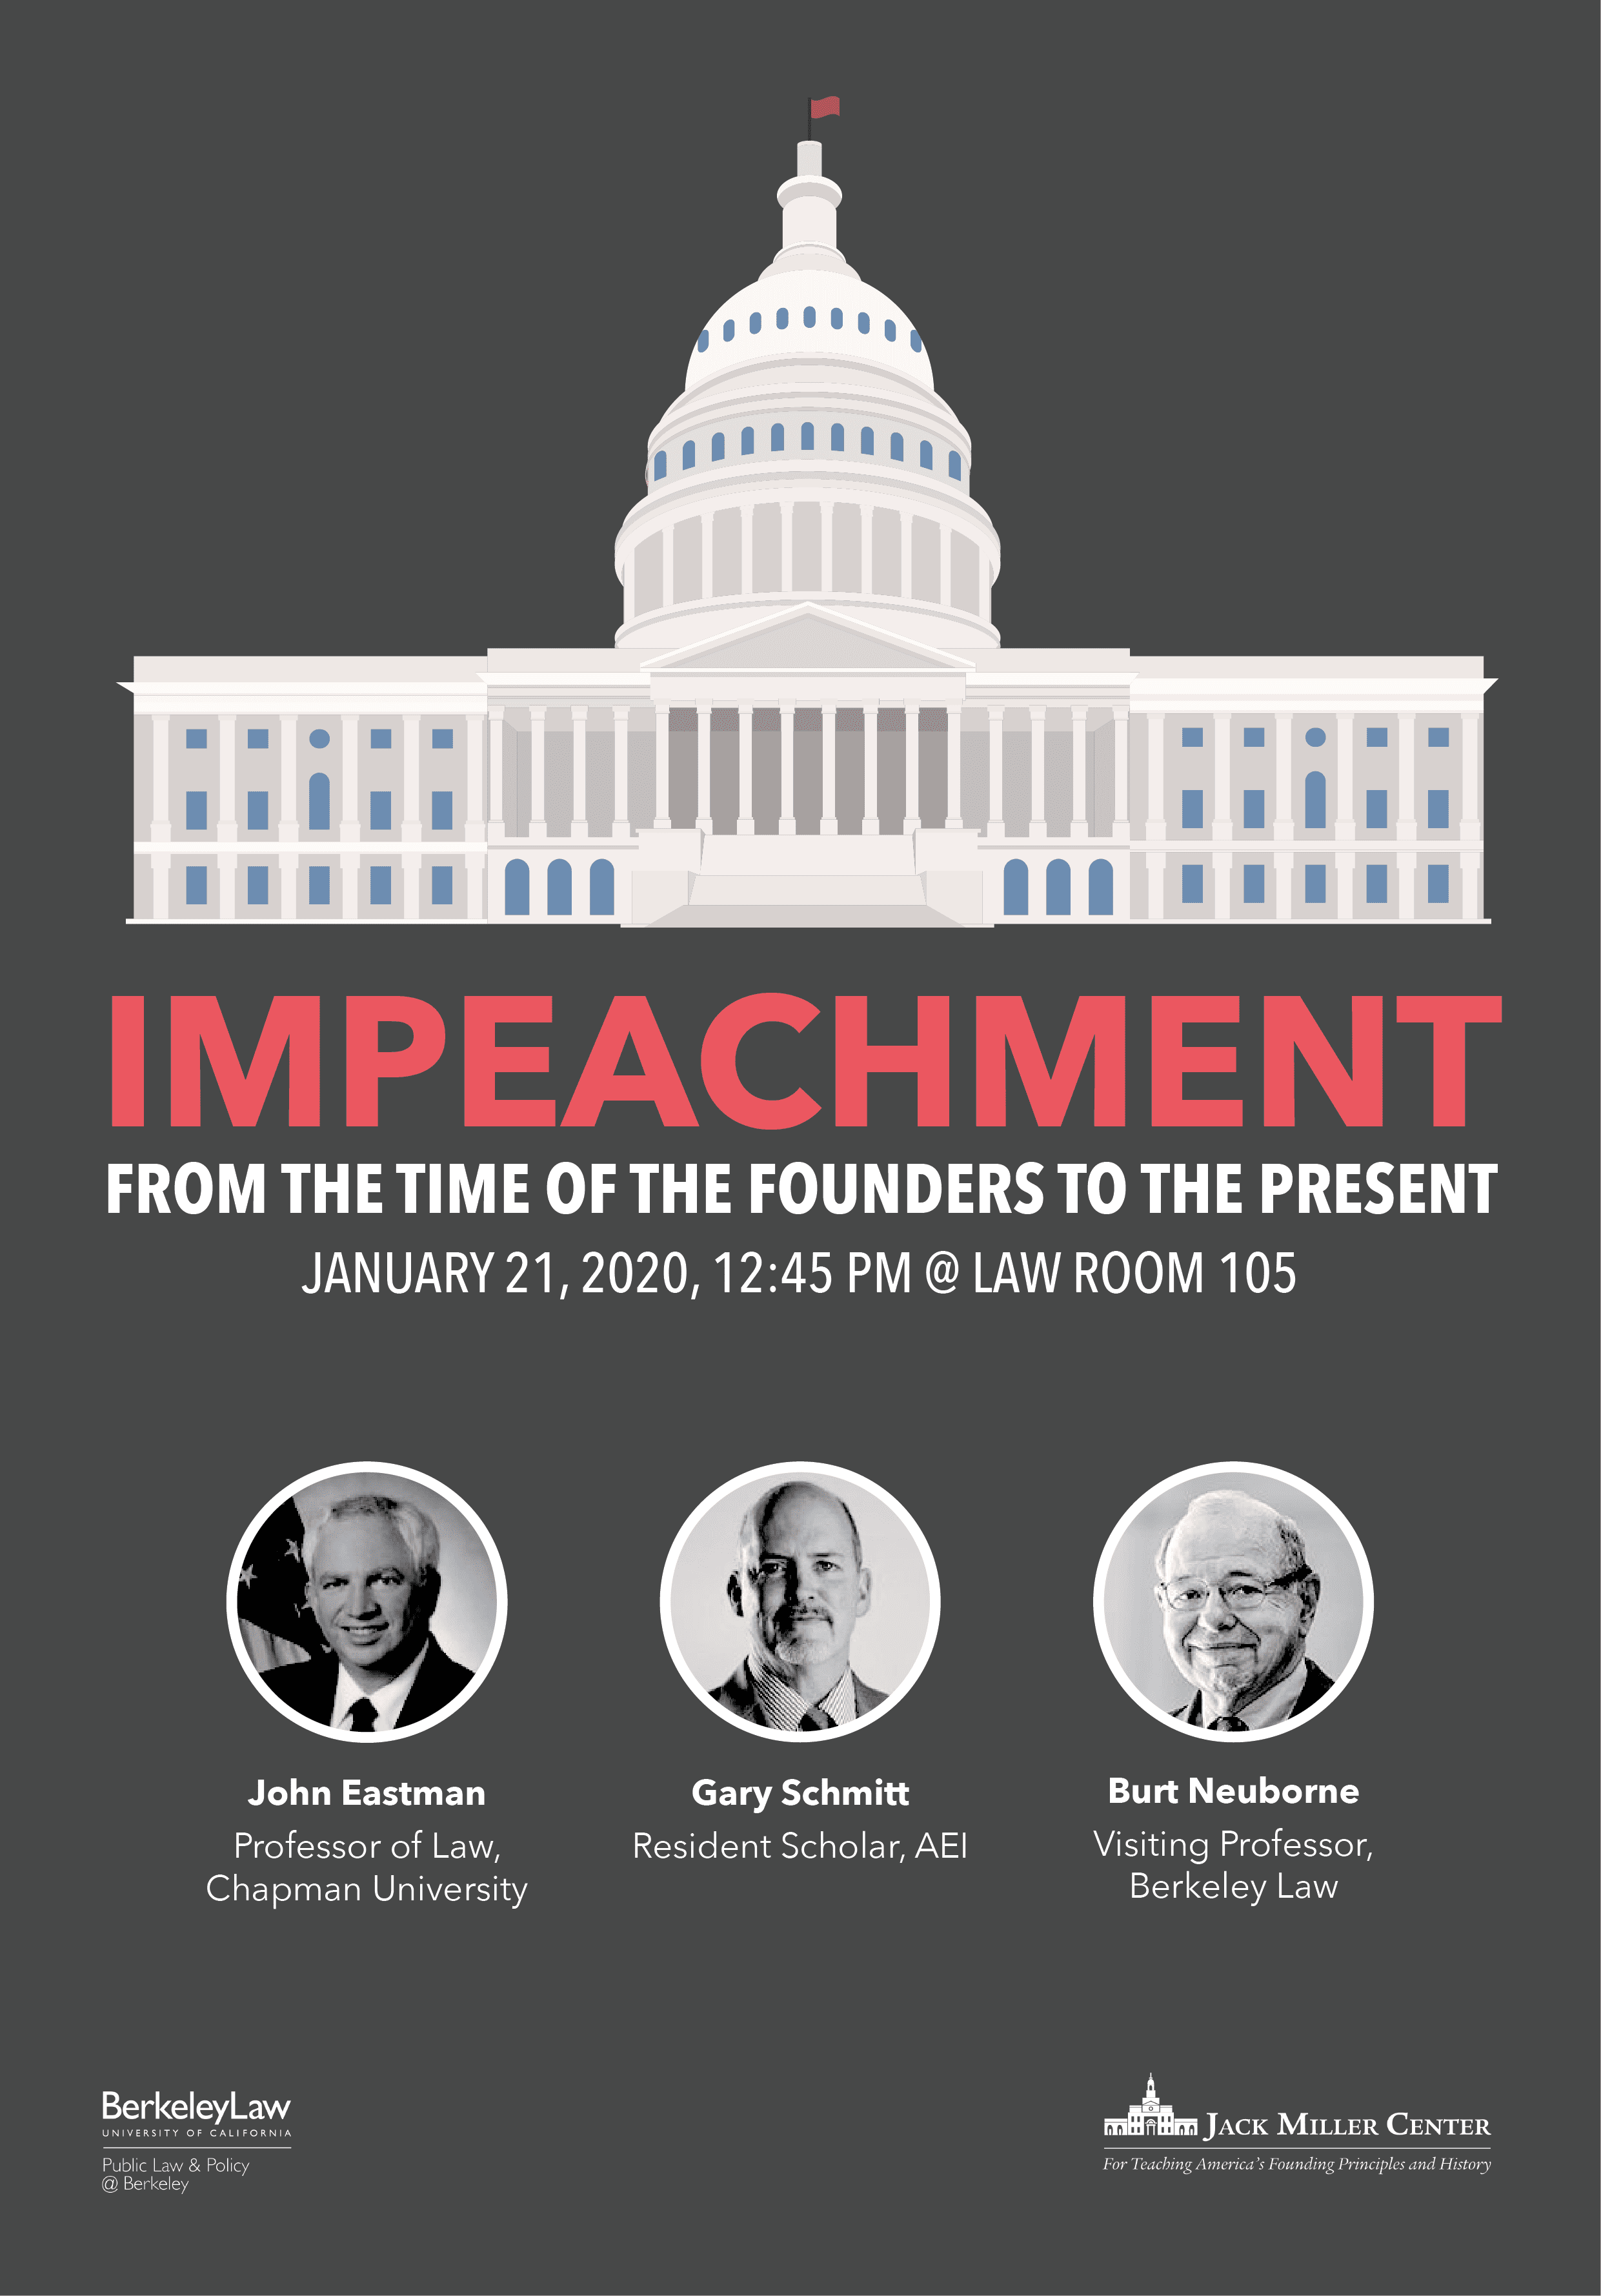 Impeachment from the Time of the Founders to the Present